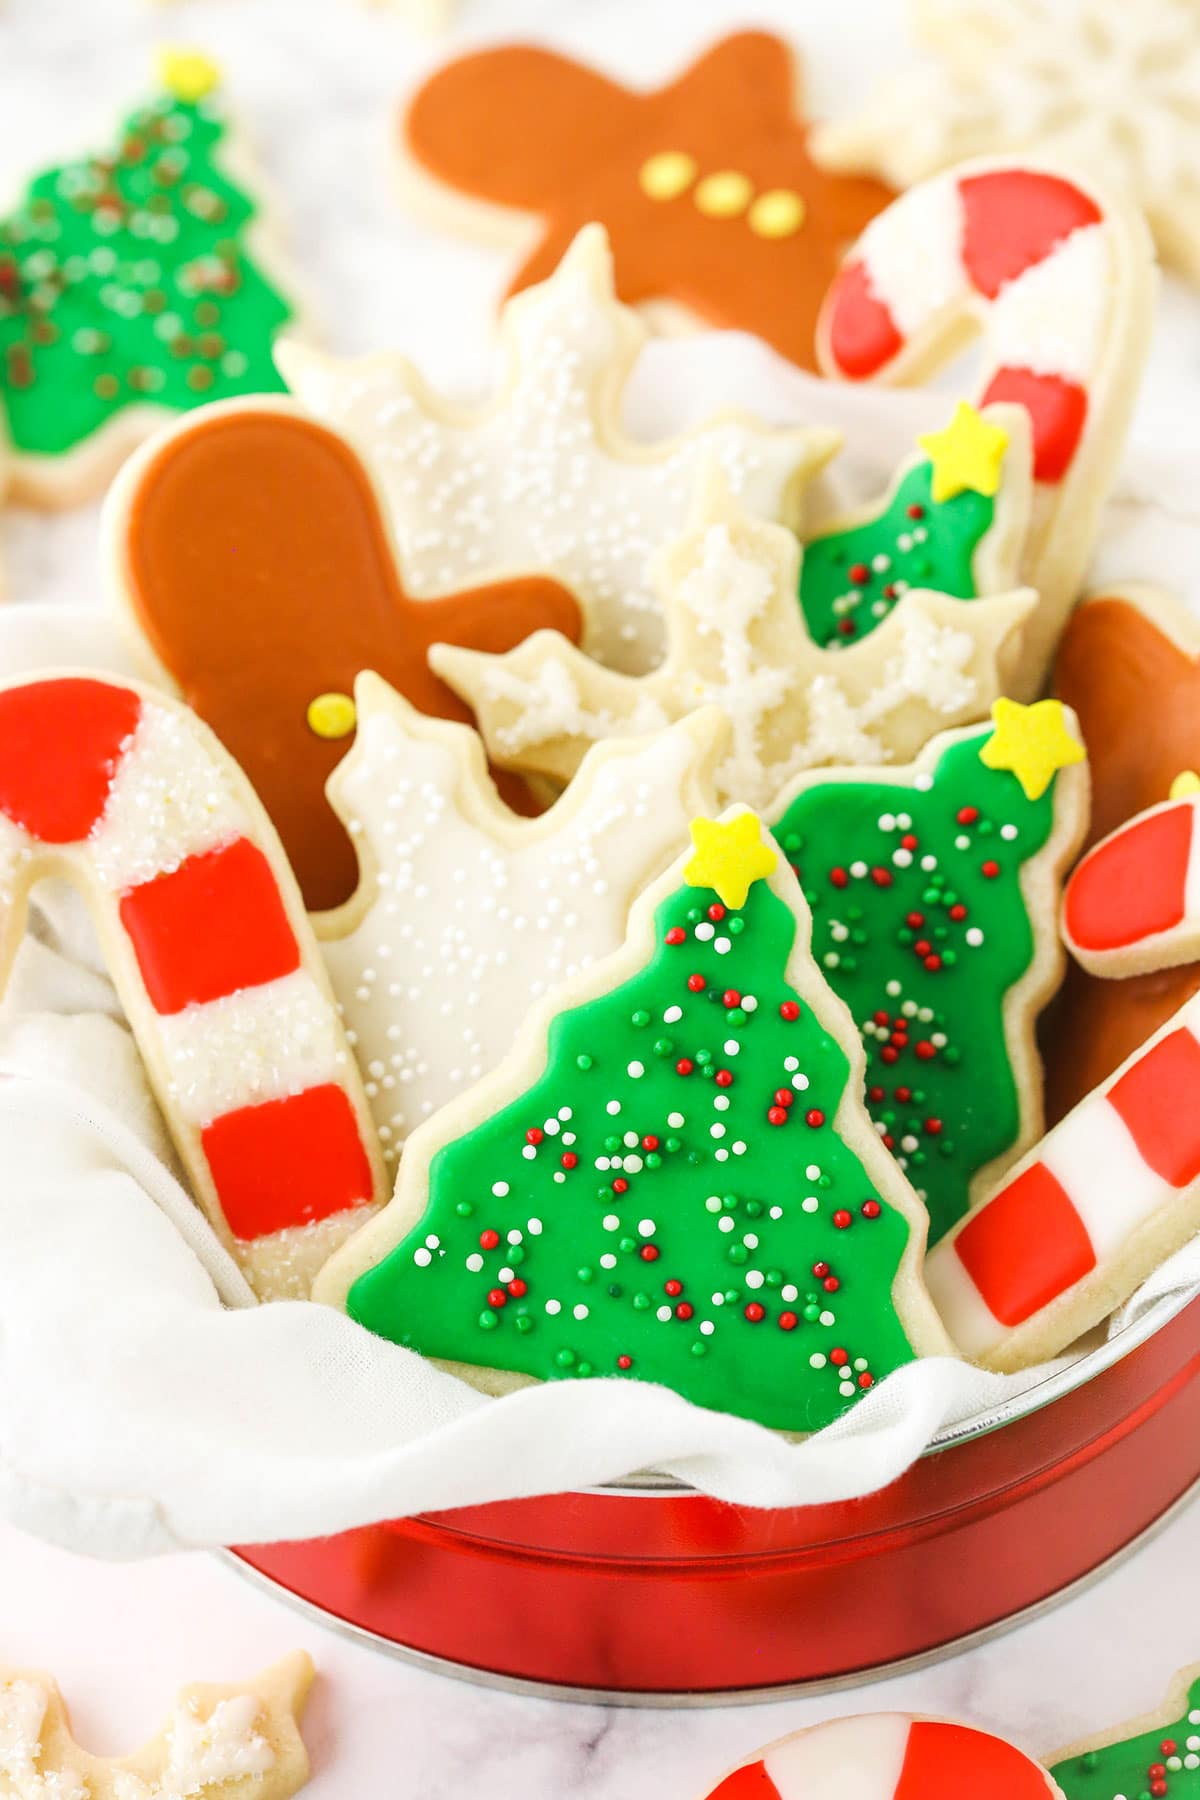 Sugar cookies shaped like snowflakes, candy canes and Christmas trees inside of a metal tin on a kitchen countertop.